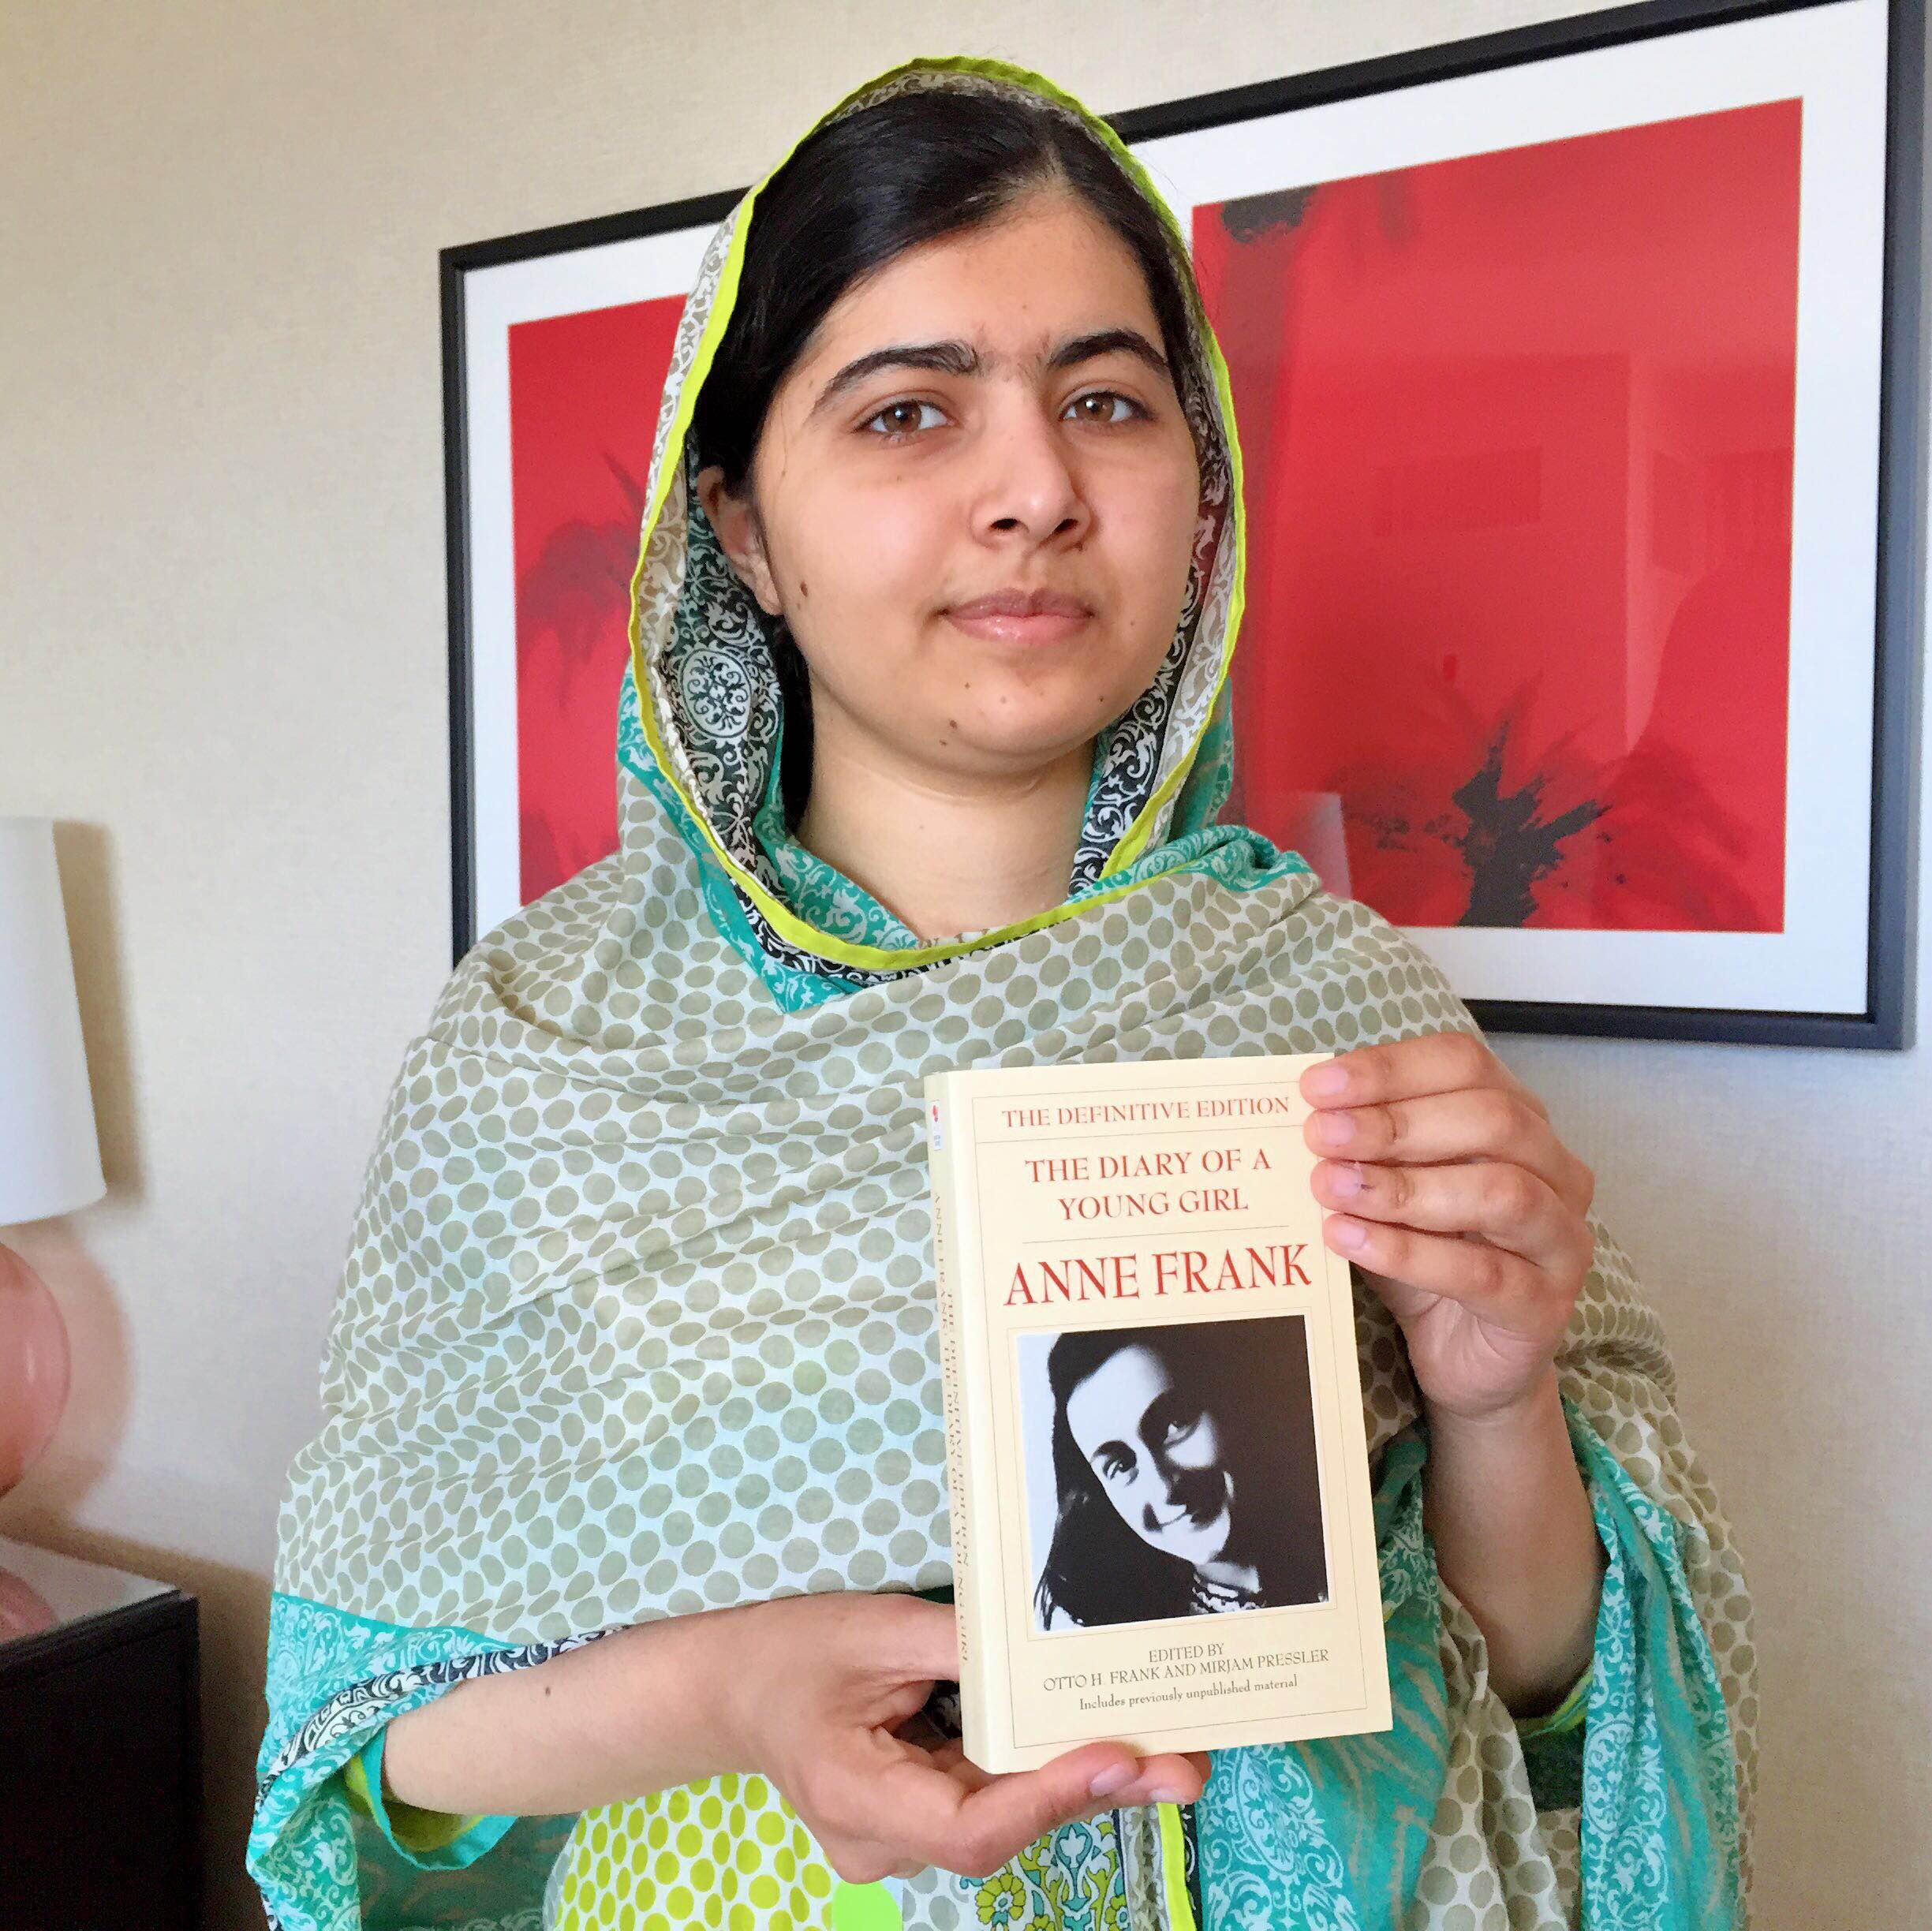 Malala’s 18th birthday request: support #BooksNotBullets